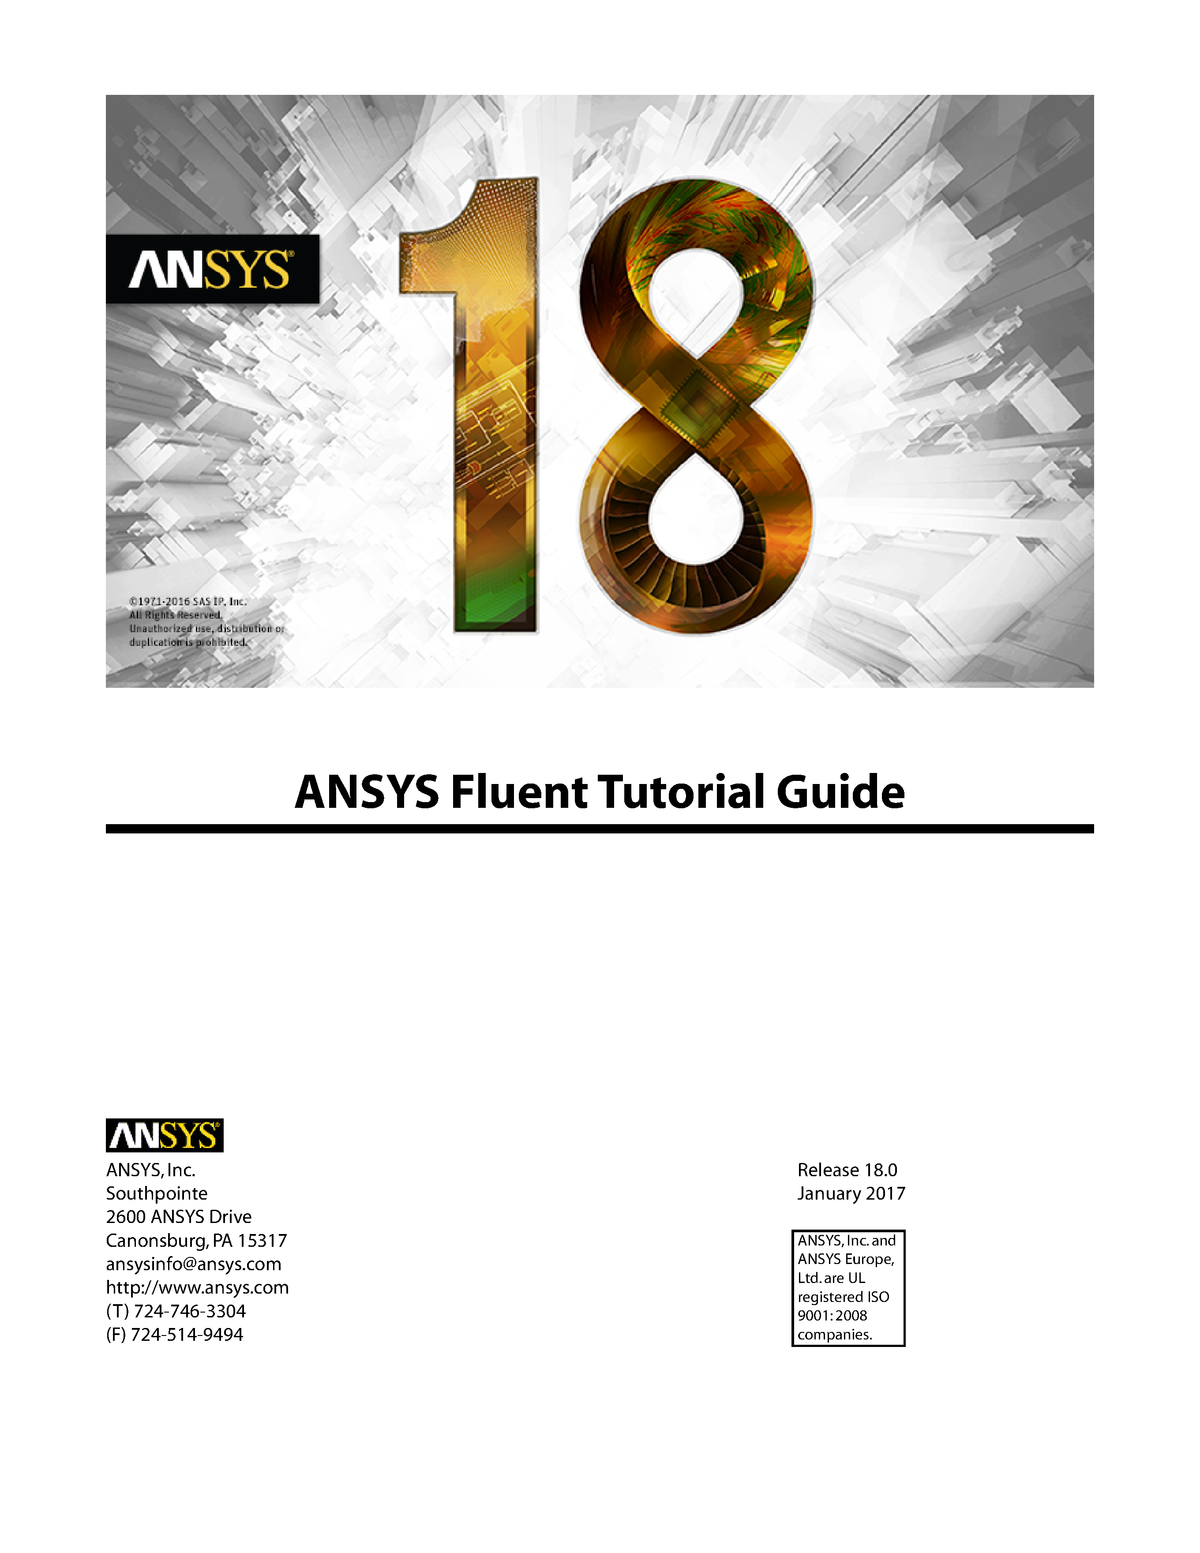 ansys fluent guide